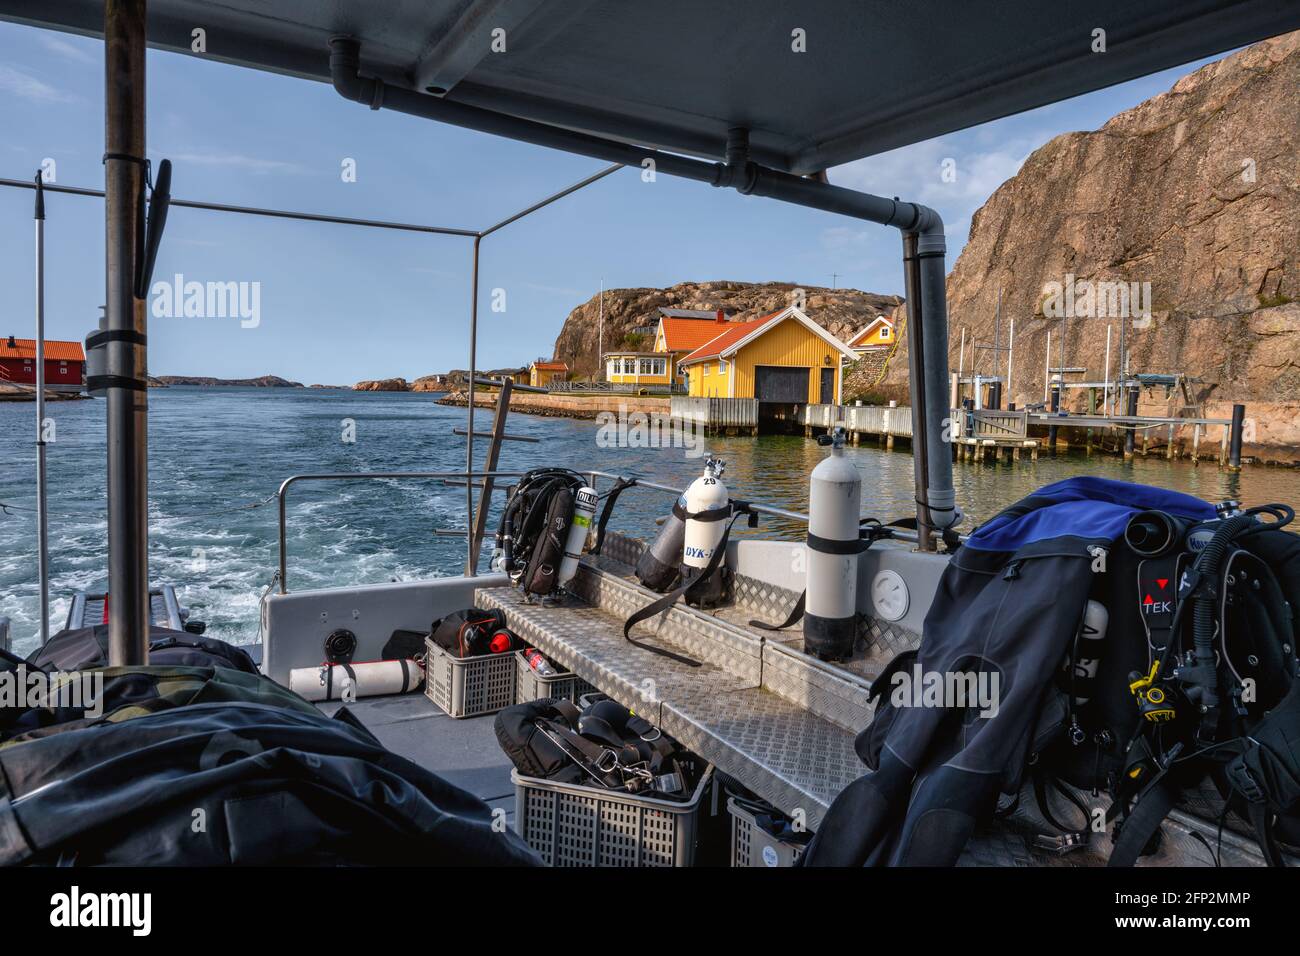 April 17, 2021 - Hamburgsund, Sweden: This picturesque fishing village on the Swedish West coast seen from the deck of a returning dive boat. Rocks and a blue sky in the background Stock Photo